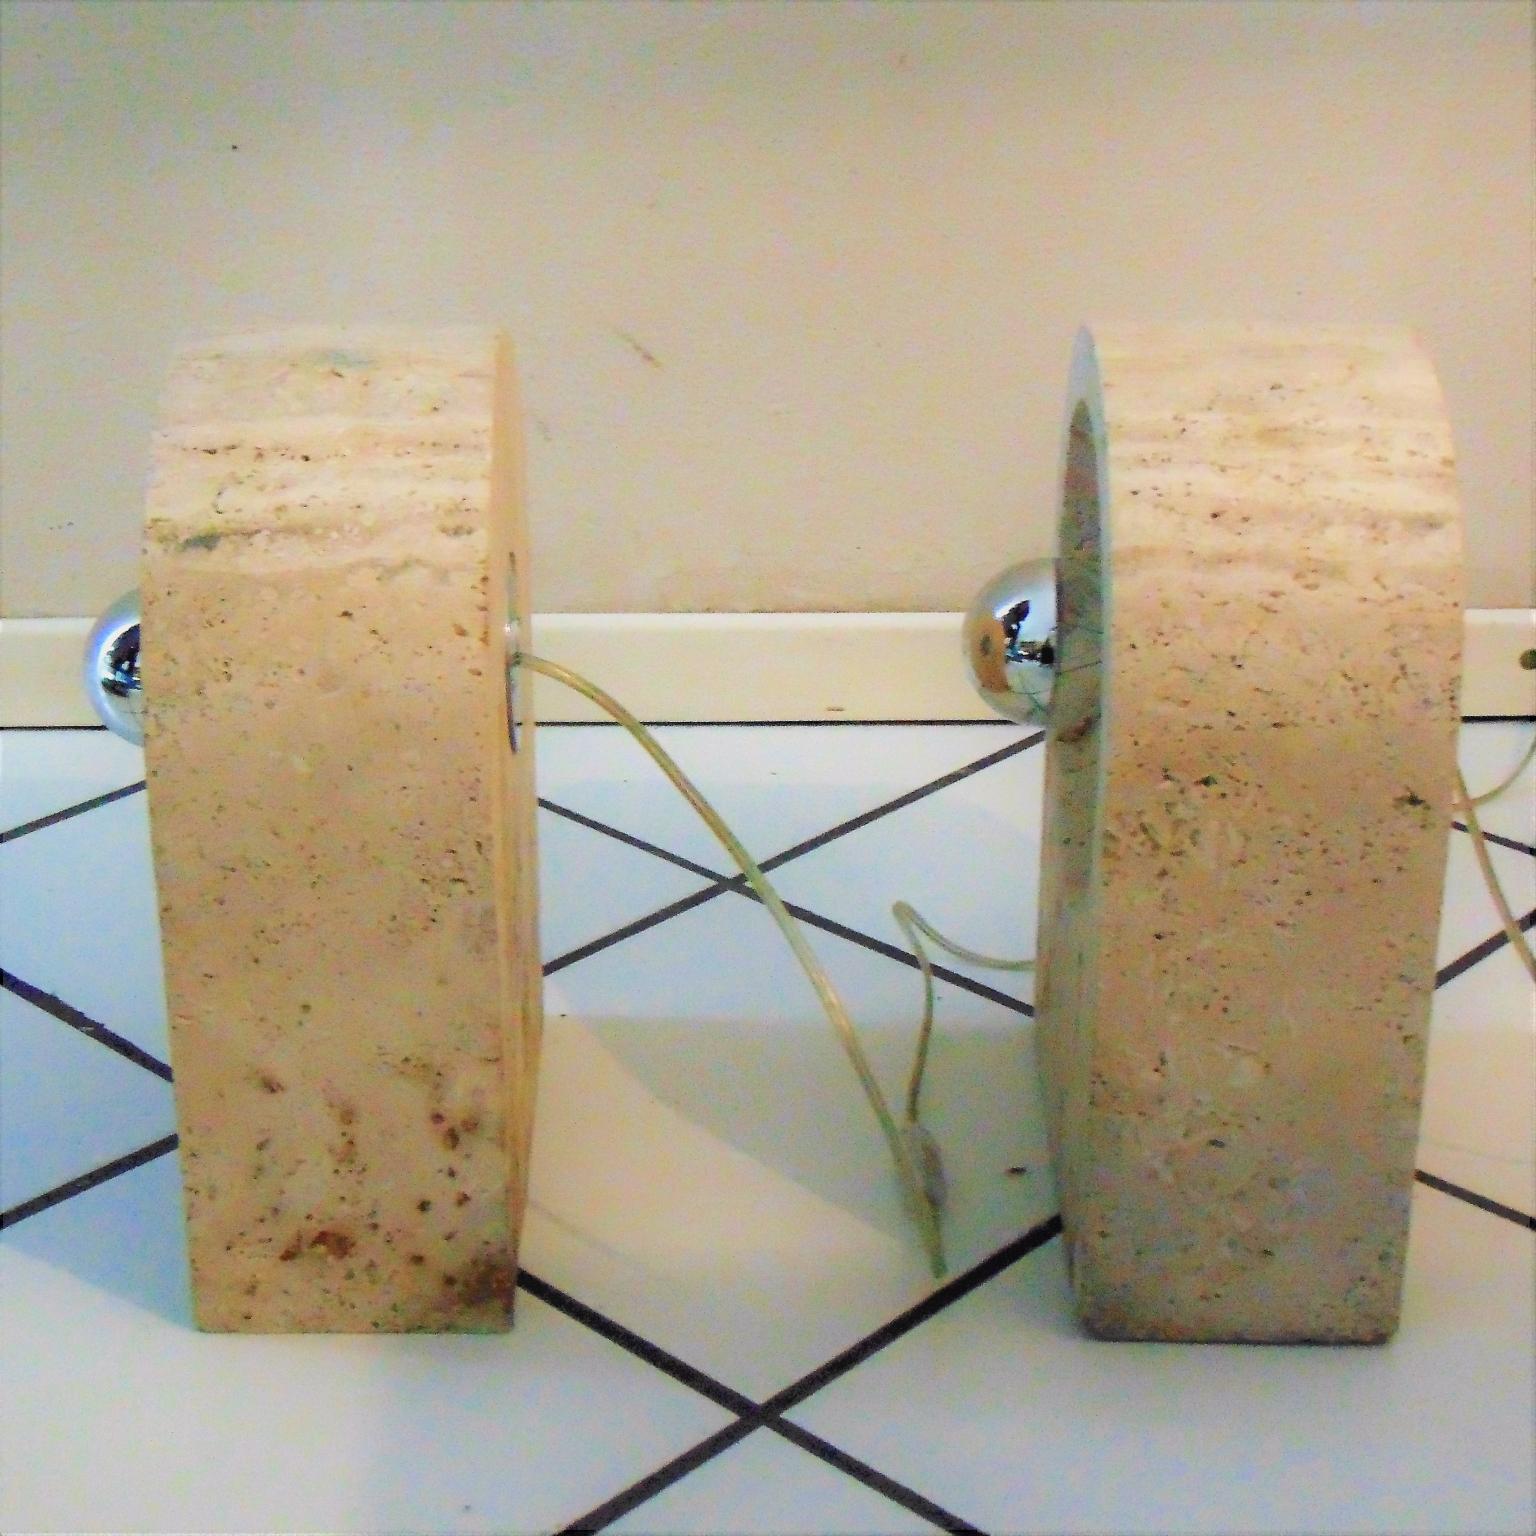 Sormani Nucleo Set of 2 Table Lamps in Travertine by G. Cesari, 1970s, Italy For Sale 2